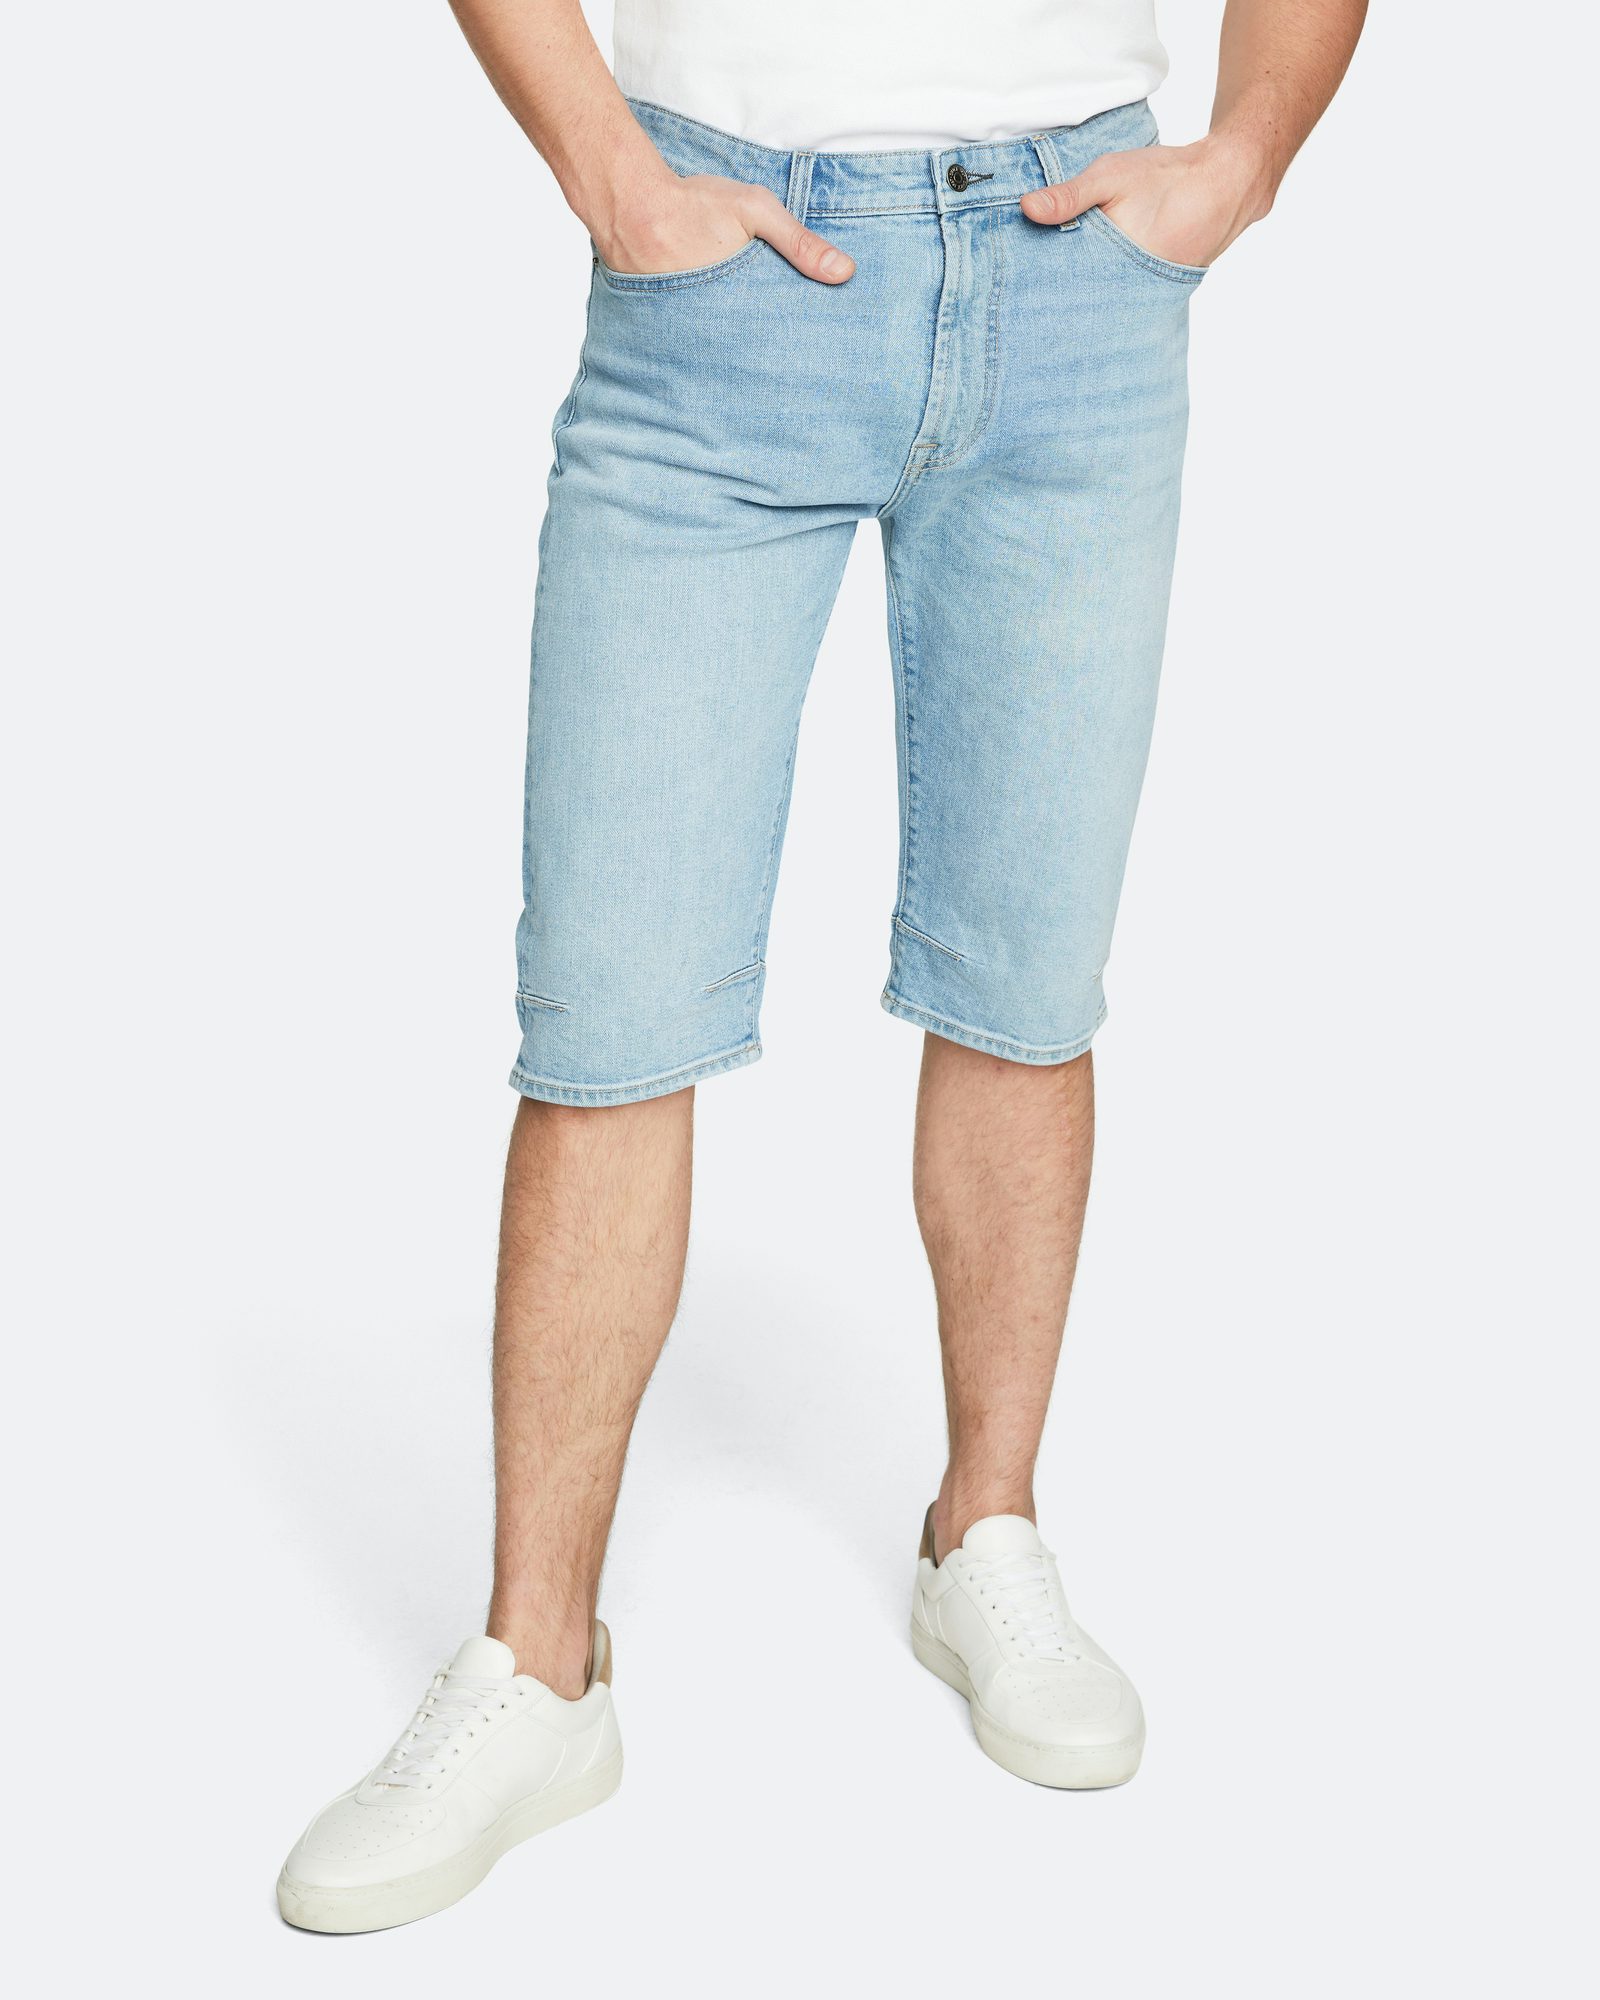 CUTEGAL Star Jorts for Men Denim Shorts Baggy Jorts Mid Rise Stretchy  Patchwork Jeans Shorts Jorts Y2K (B,Small,Small) at Amazon Men's Clothing  store